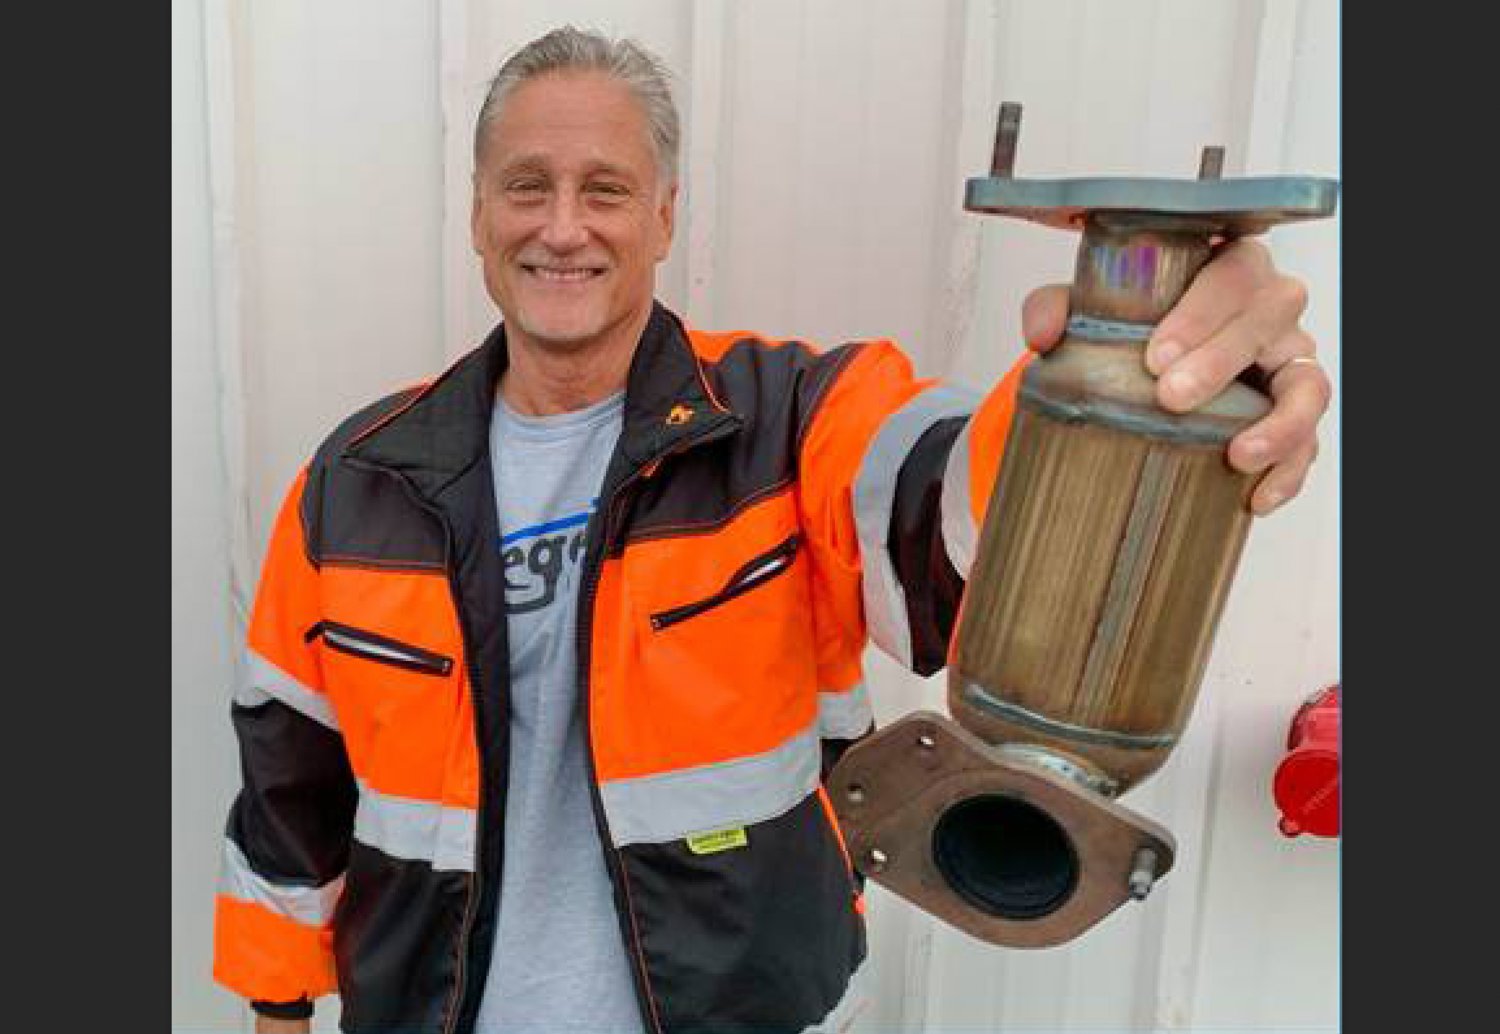 District 19 Sen. Jeff Wilson, R-Longview, has introduced a bill in the state Legislature intended to target the growing wave of catalytic converter thefts in Washington state. 